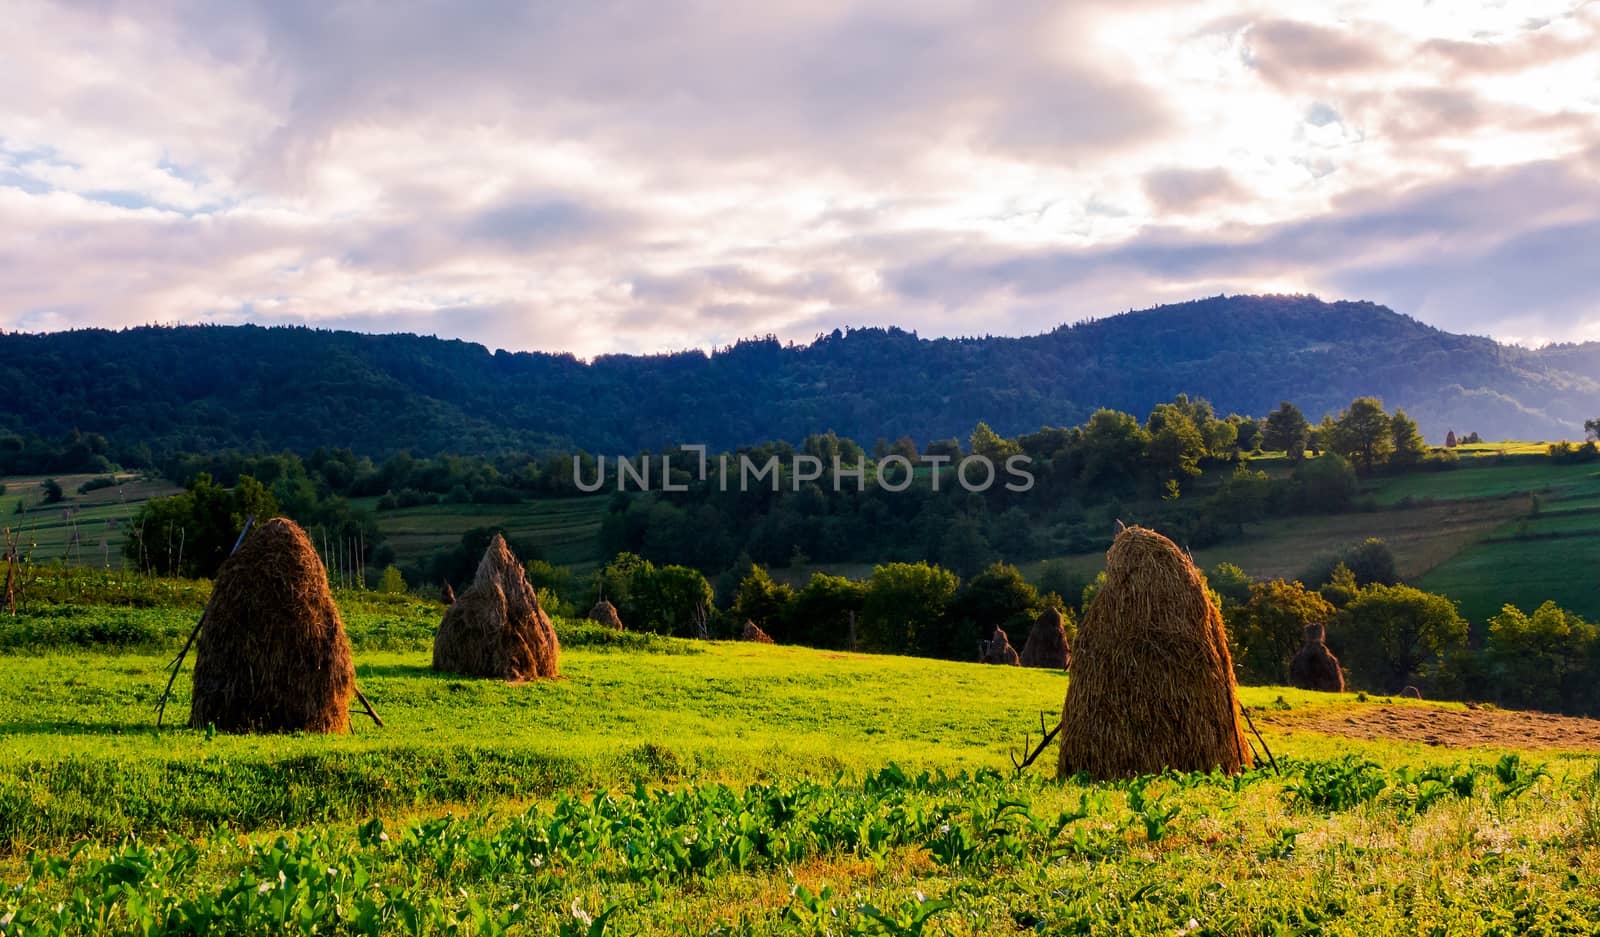 haystacks on the grassy field in mountains. lovely summer scenery of rural area in the morning